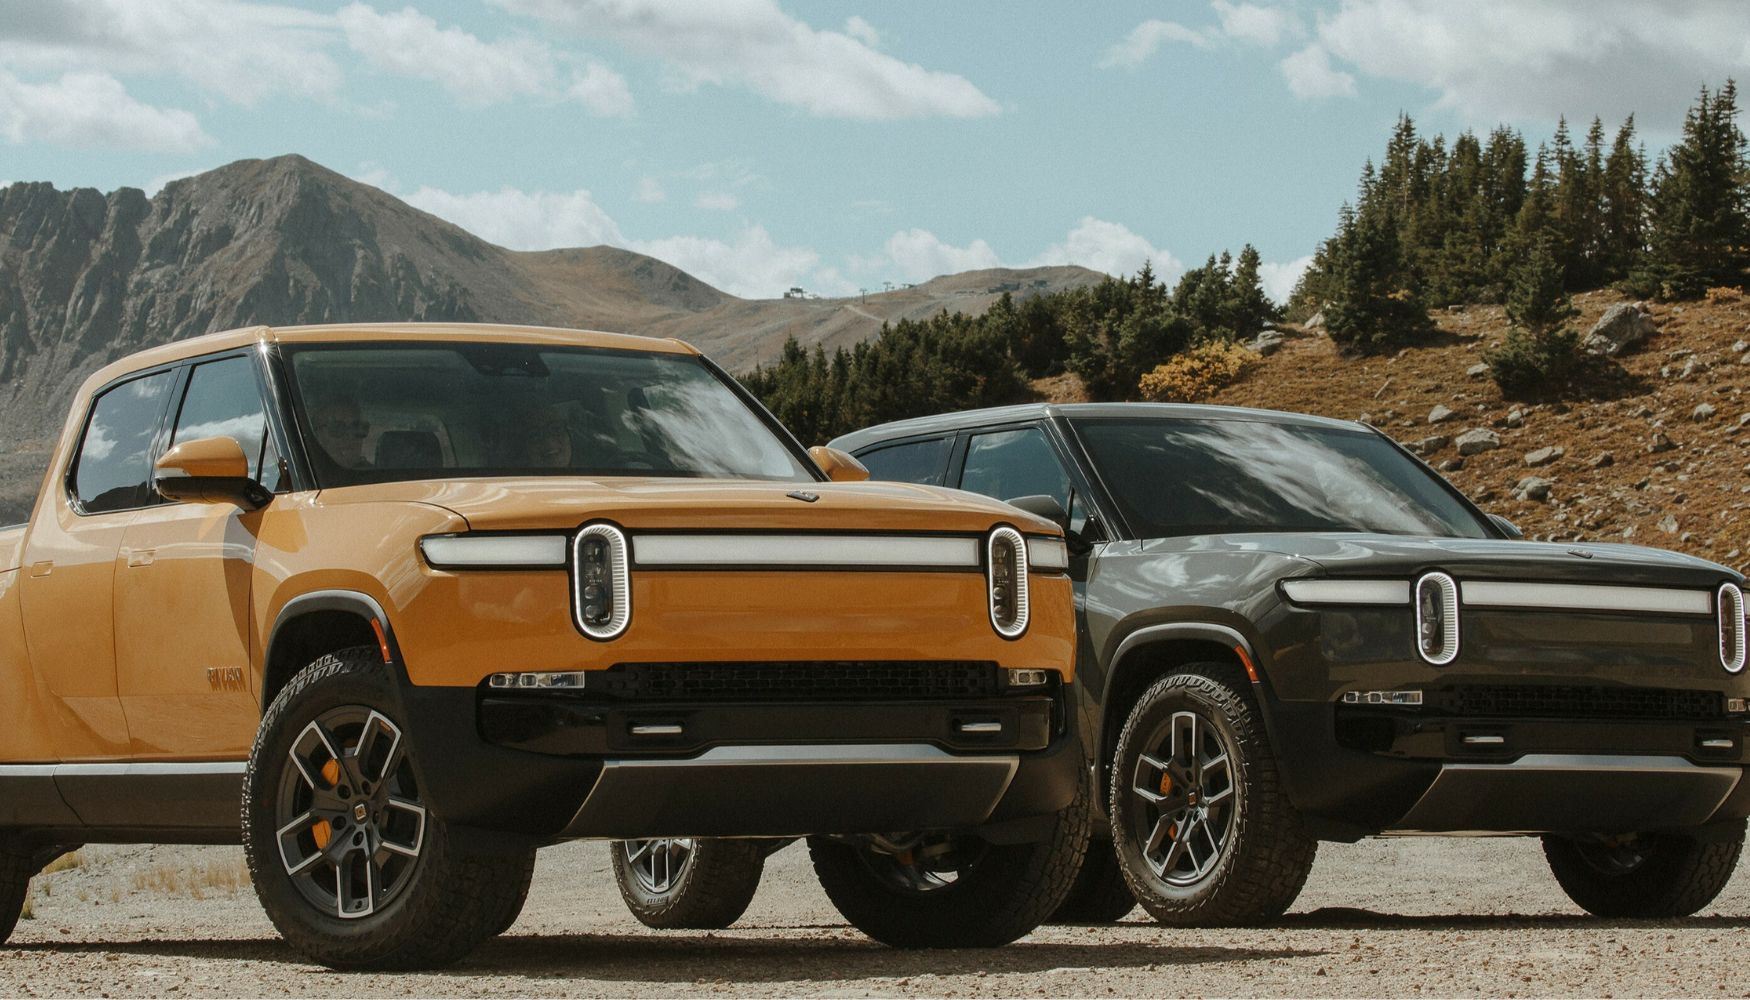 rivian-ceo-plans-to-make-evs-cheaper-by-upgrading-computer-systems